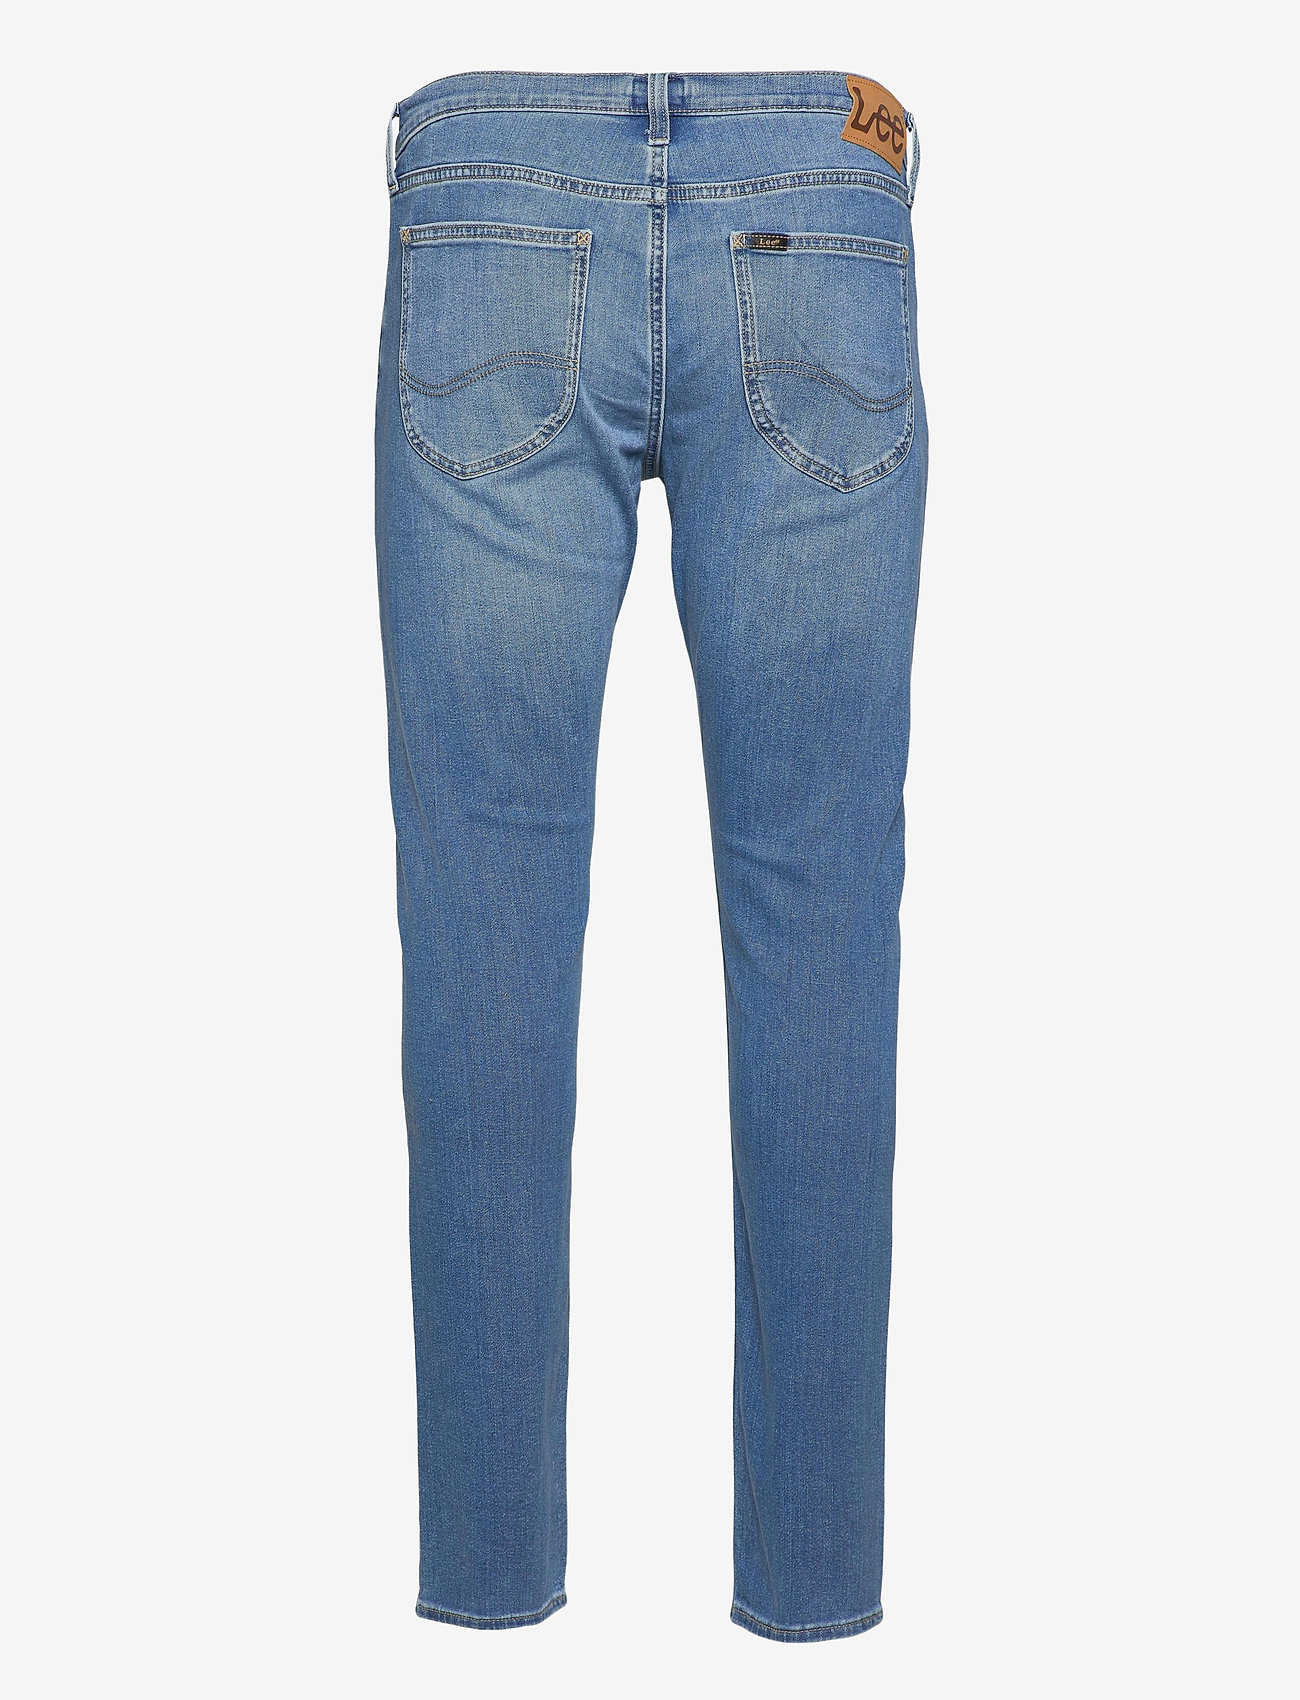 Lee Jeans - LUKE - tapered jeans - light ray - 1